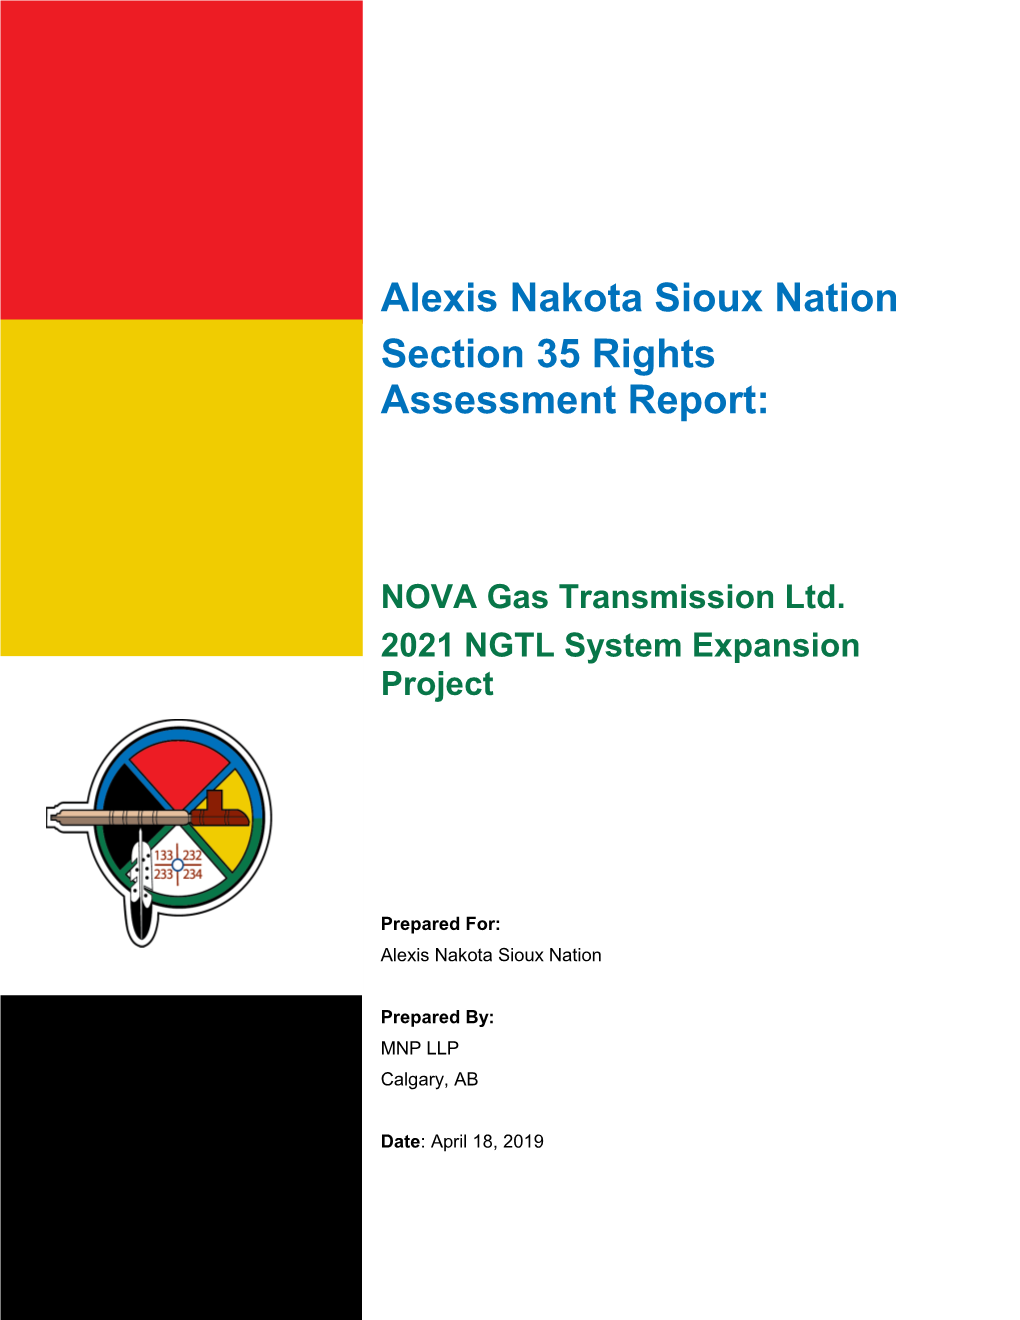 Alexis Nakota Sioux Nation Section 35 Rights Assessment Report